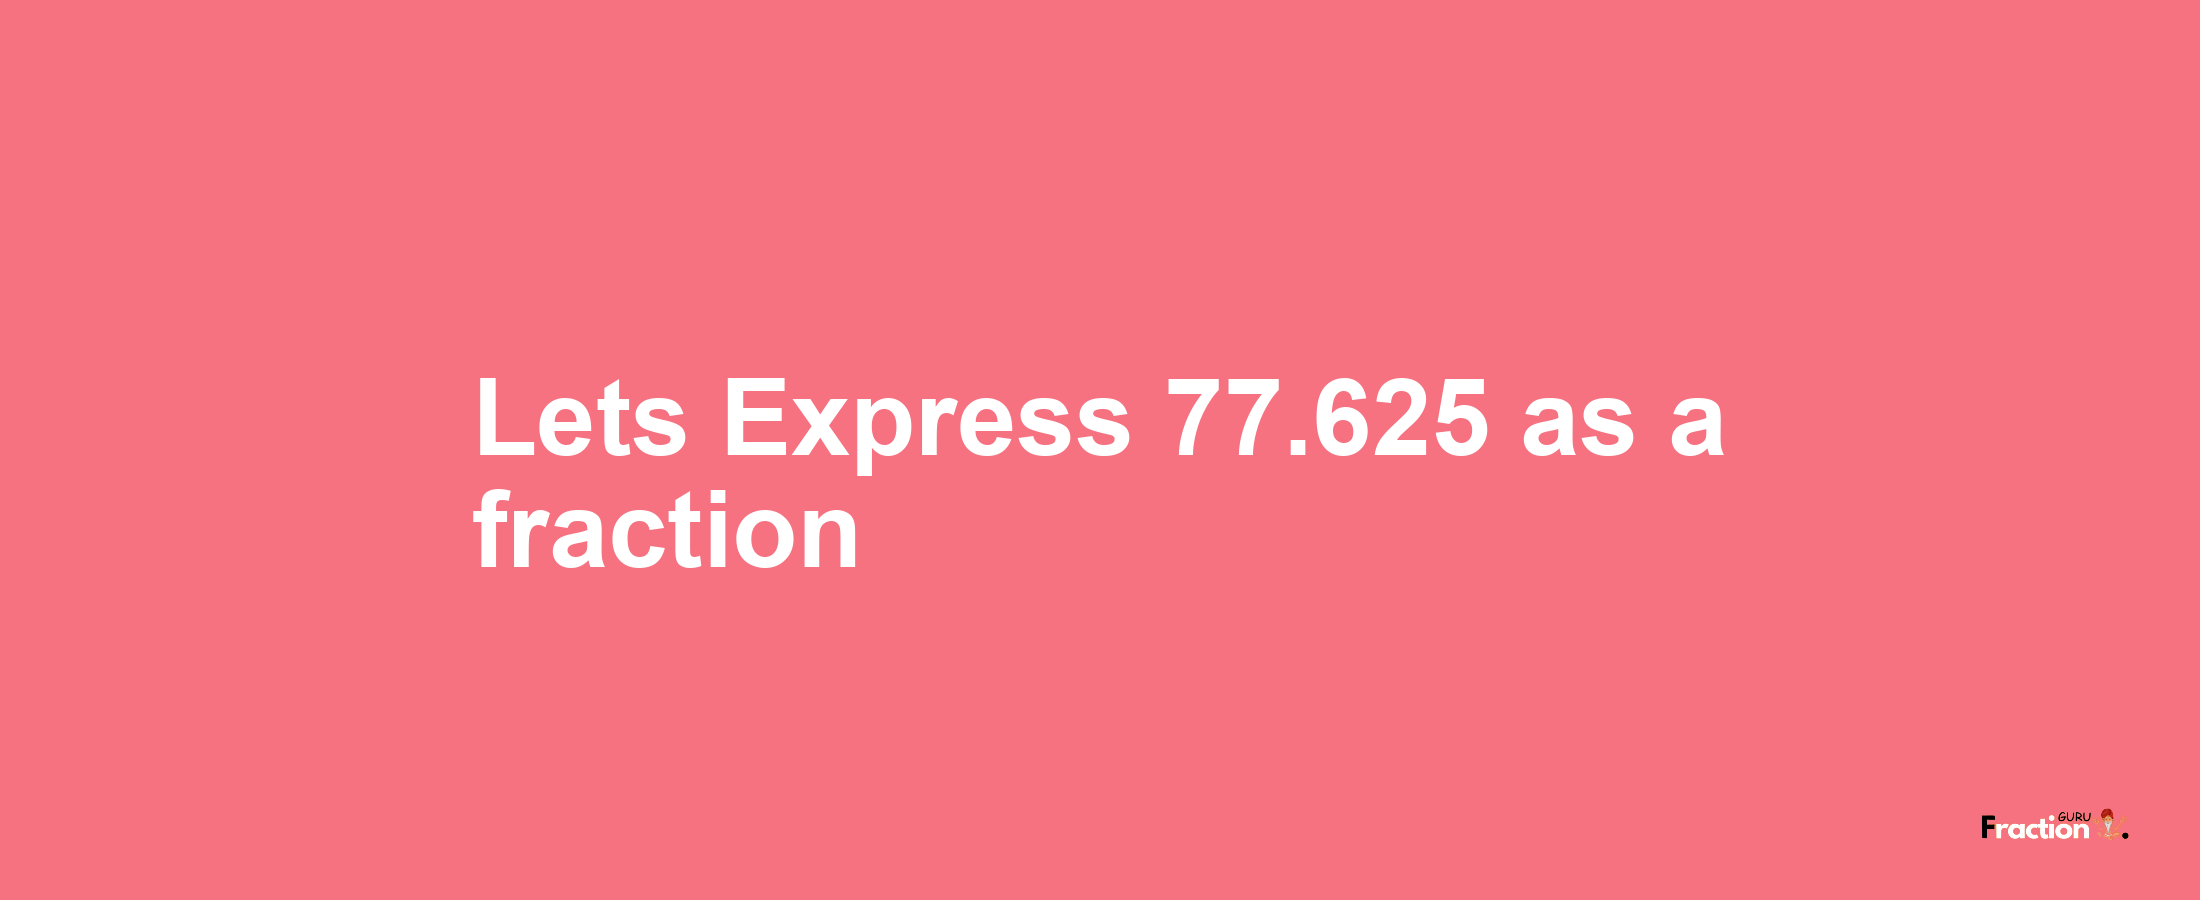 Lets Express 77.625 as afraction